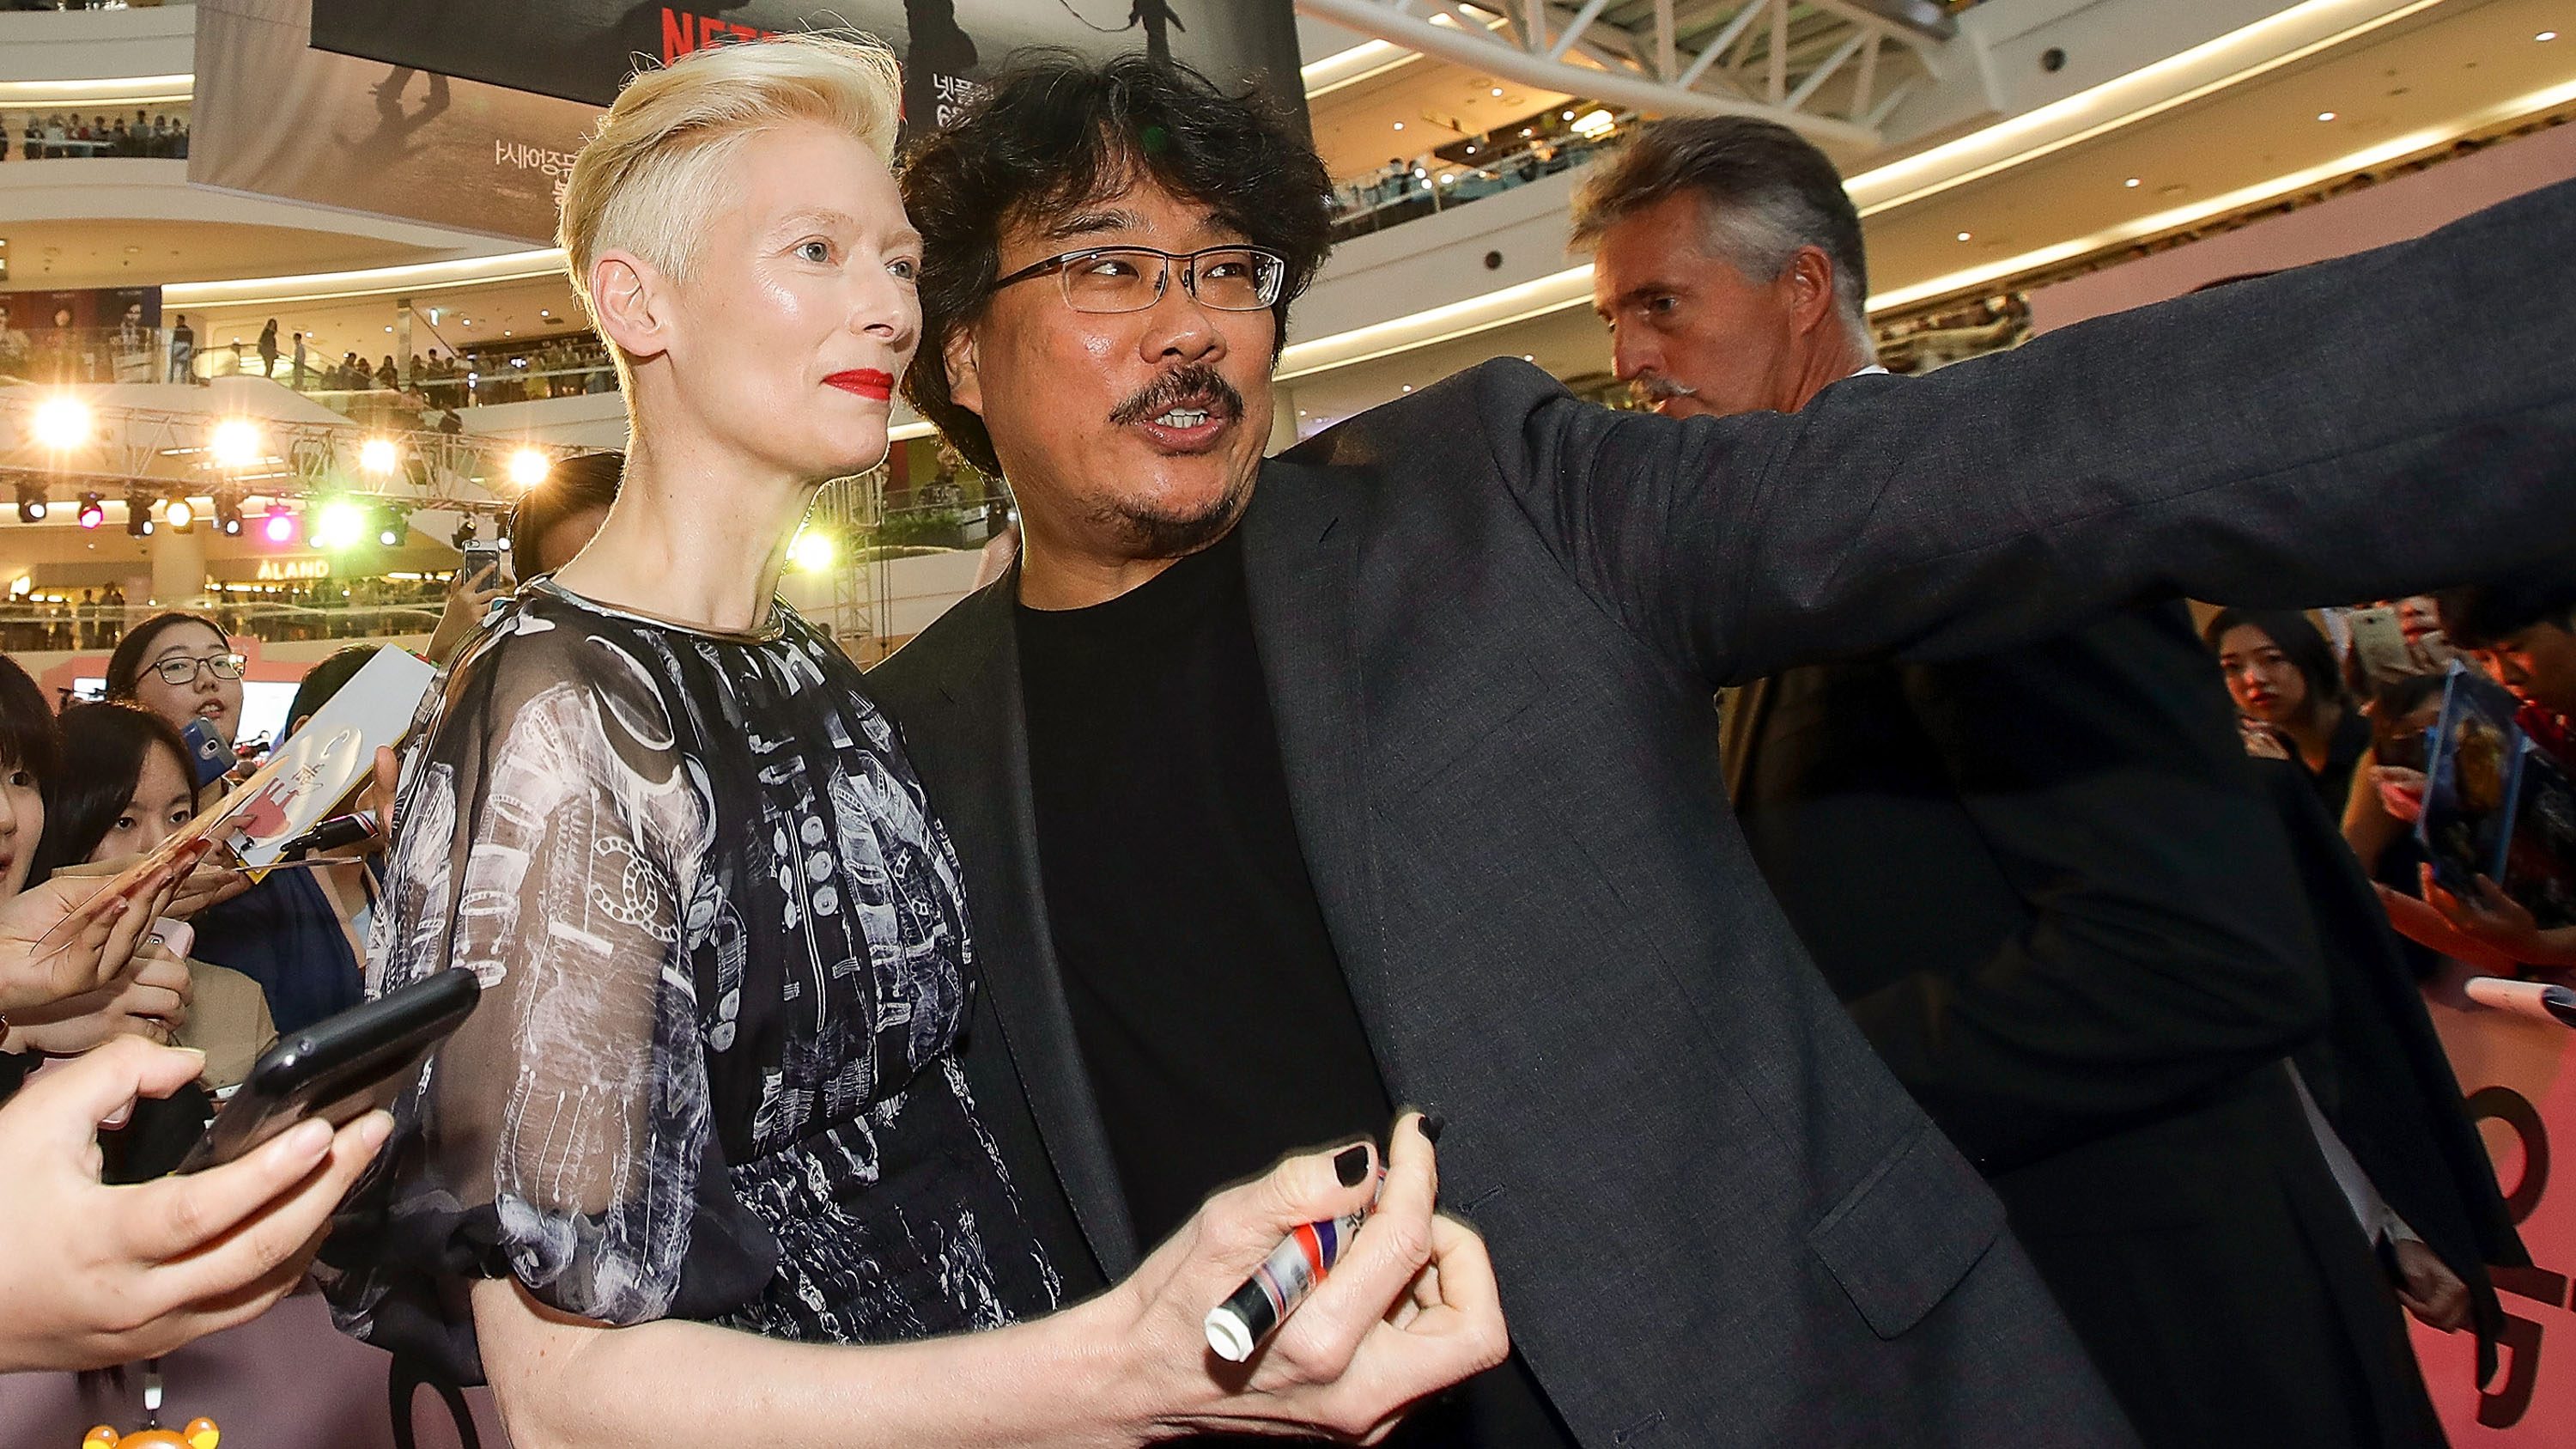 TILDA AND BONG. Tilda Swinton attends the Korean red carpet premiere of Netflix's 'Okja' with director Bong Joon-Ho. Photo by Chung Sung-Jun/Getty Images for Netflix  